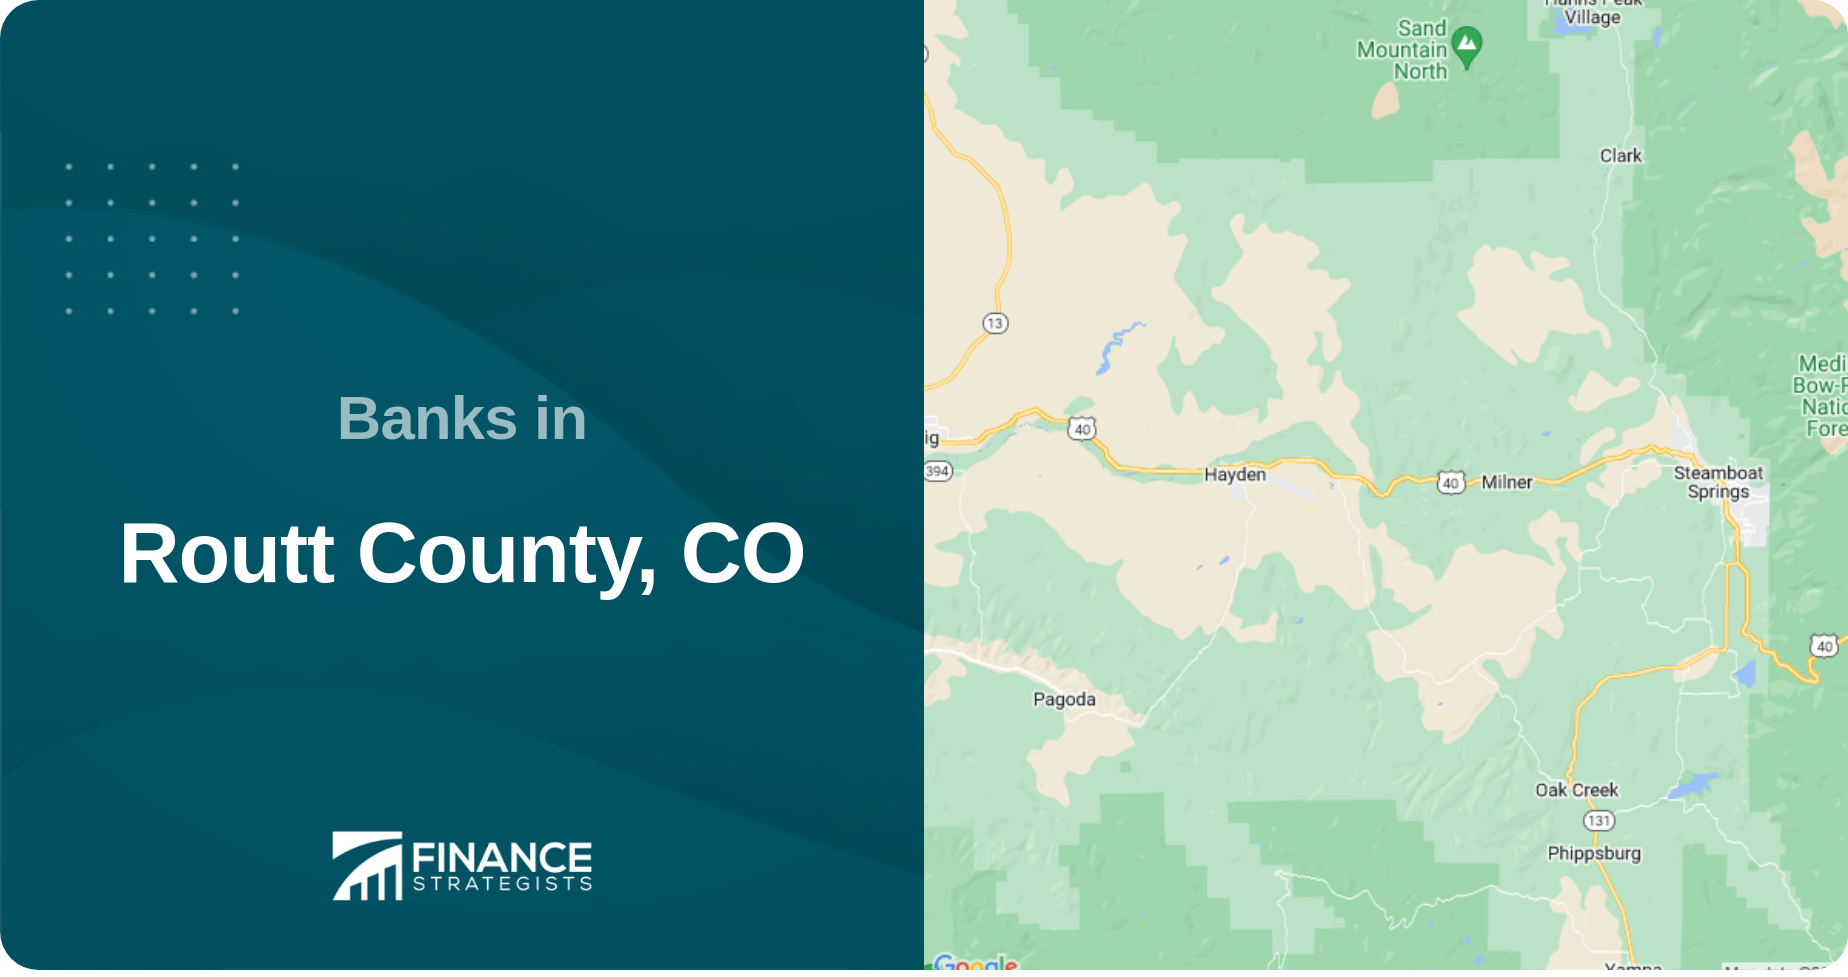 Banks in Routt County, CO